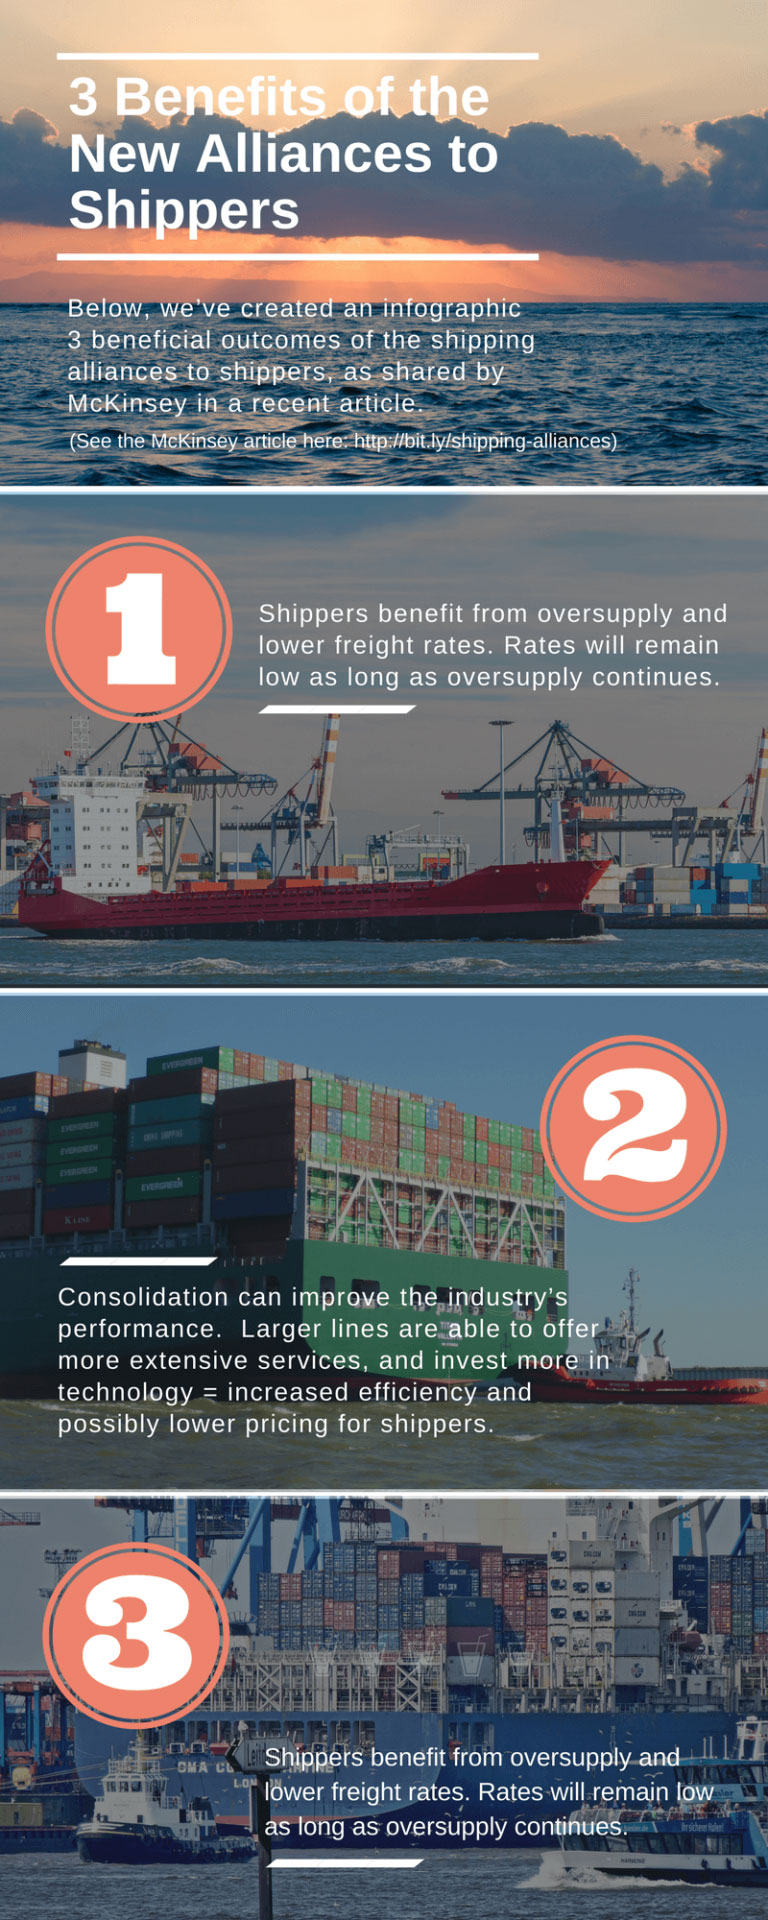 3 Benefits of New Alliances to Shippers 1 1 768x1920